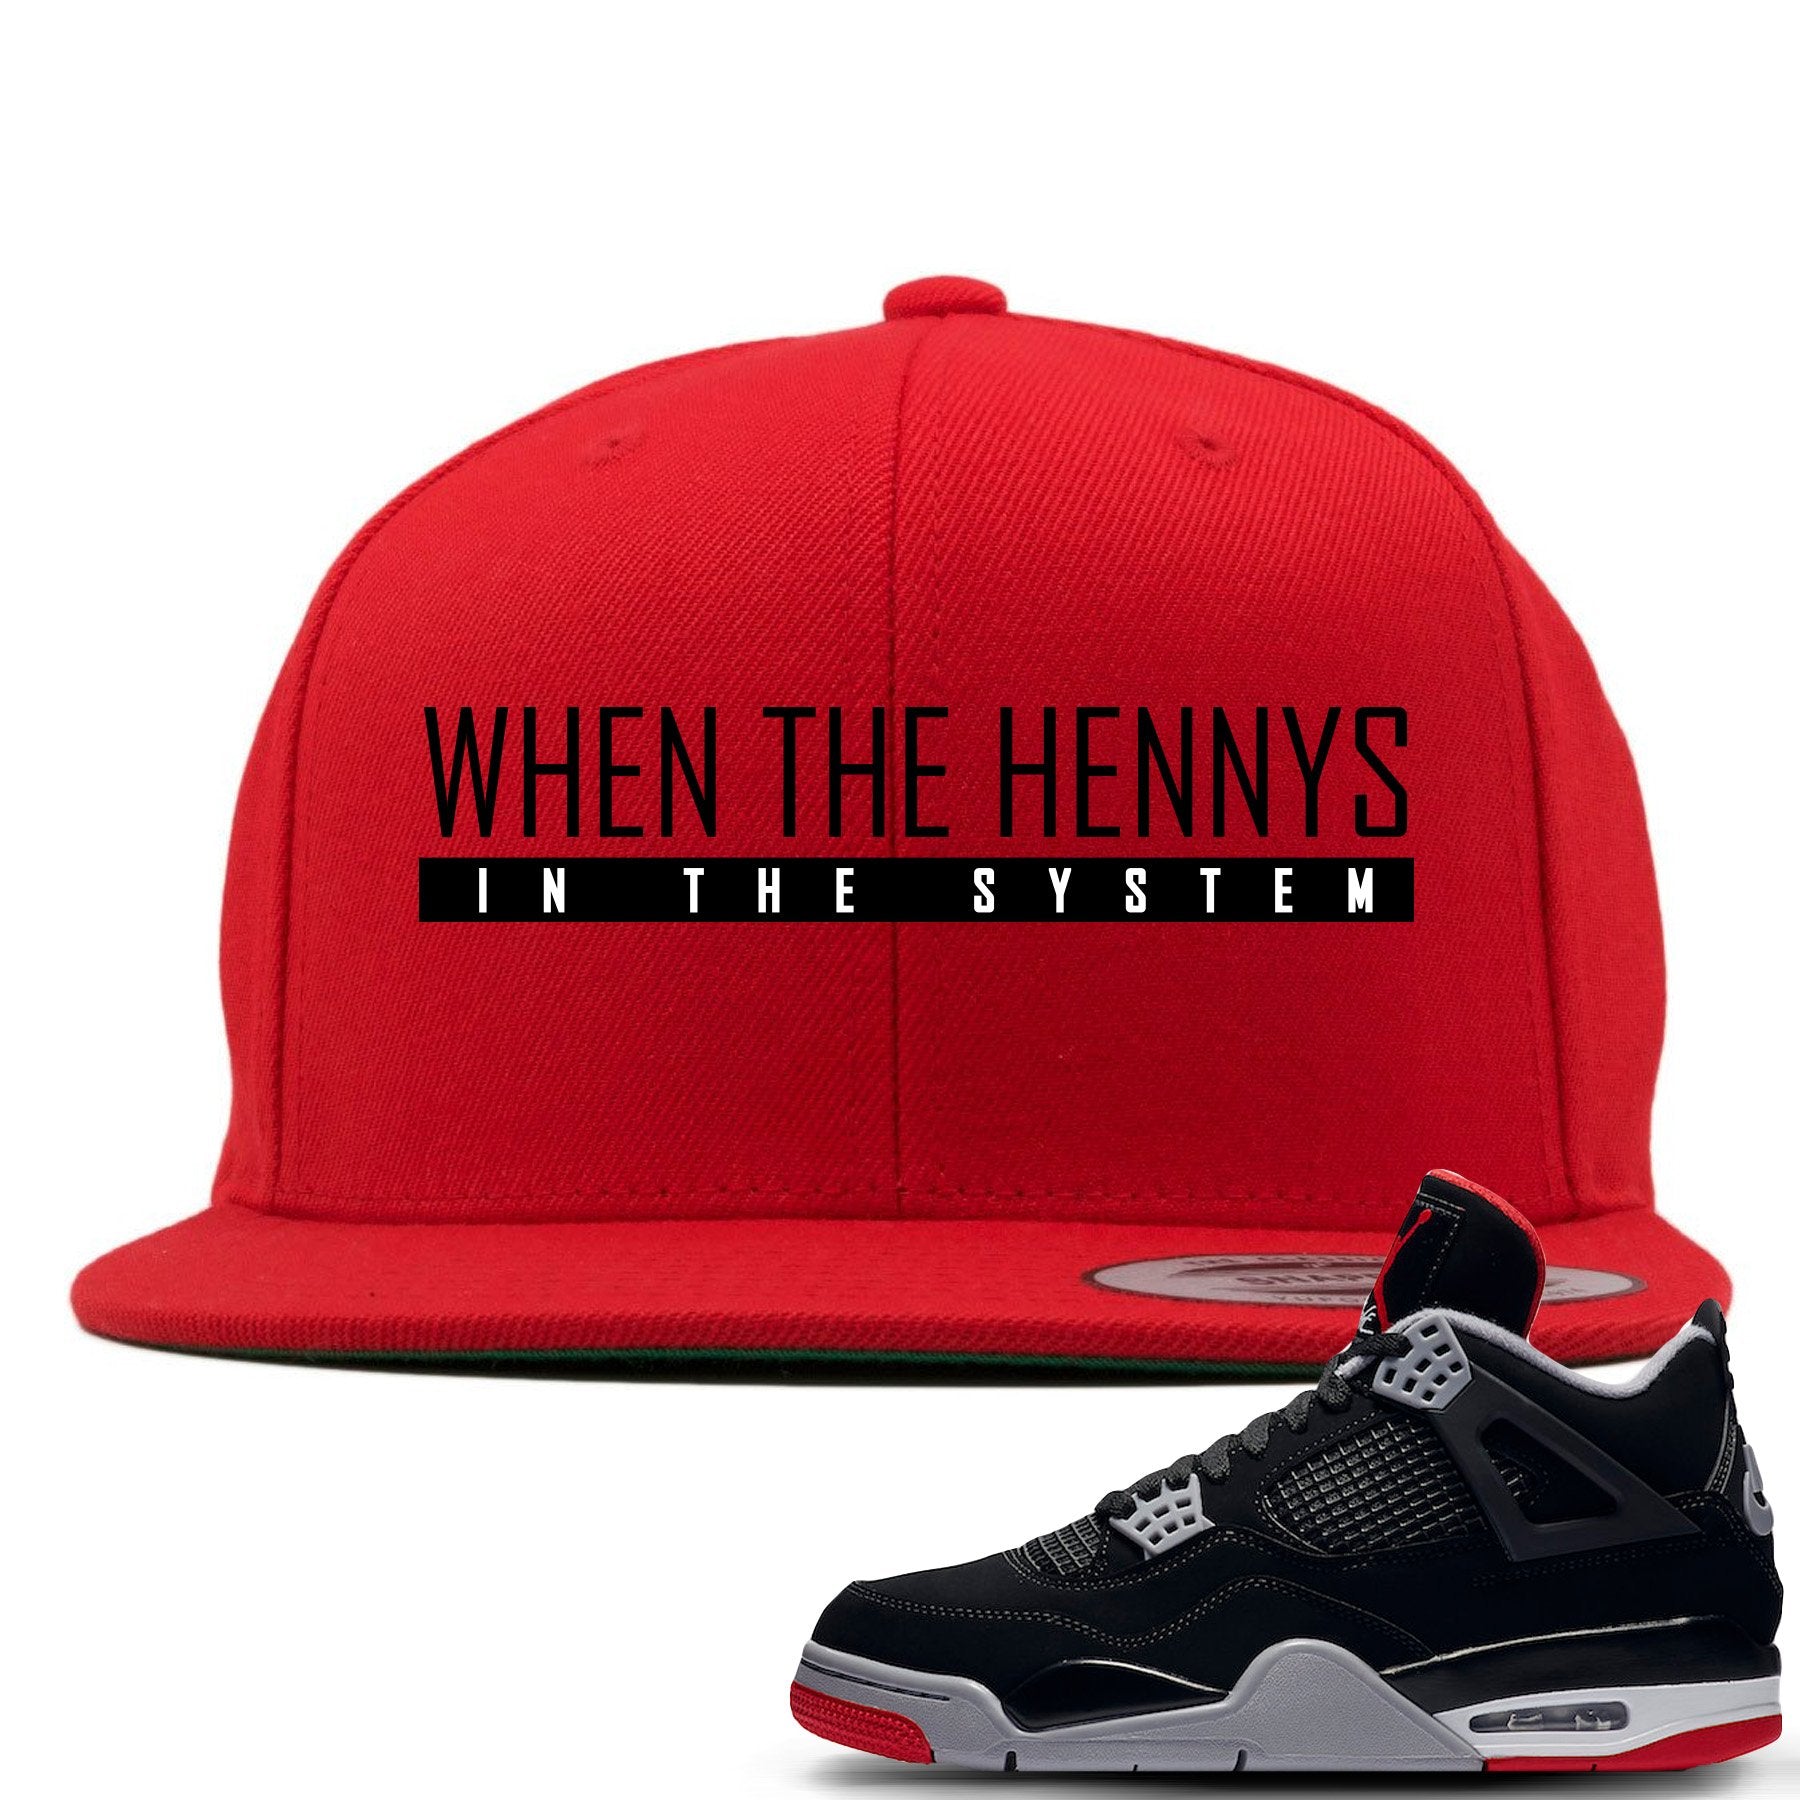 This red and black snapback will match great with your Air Jordan 4 Bred shoes